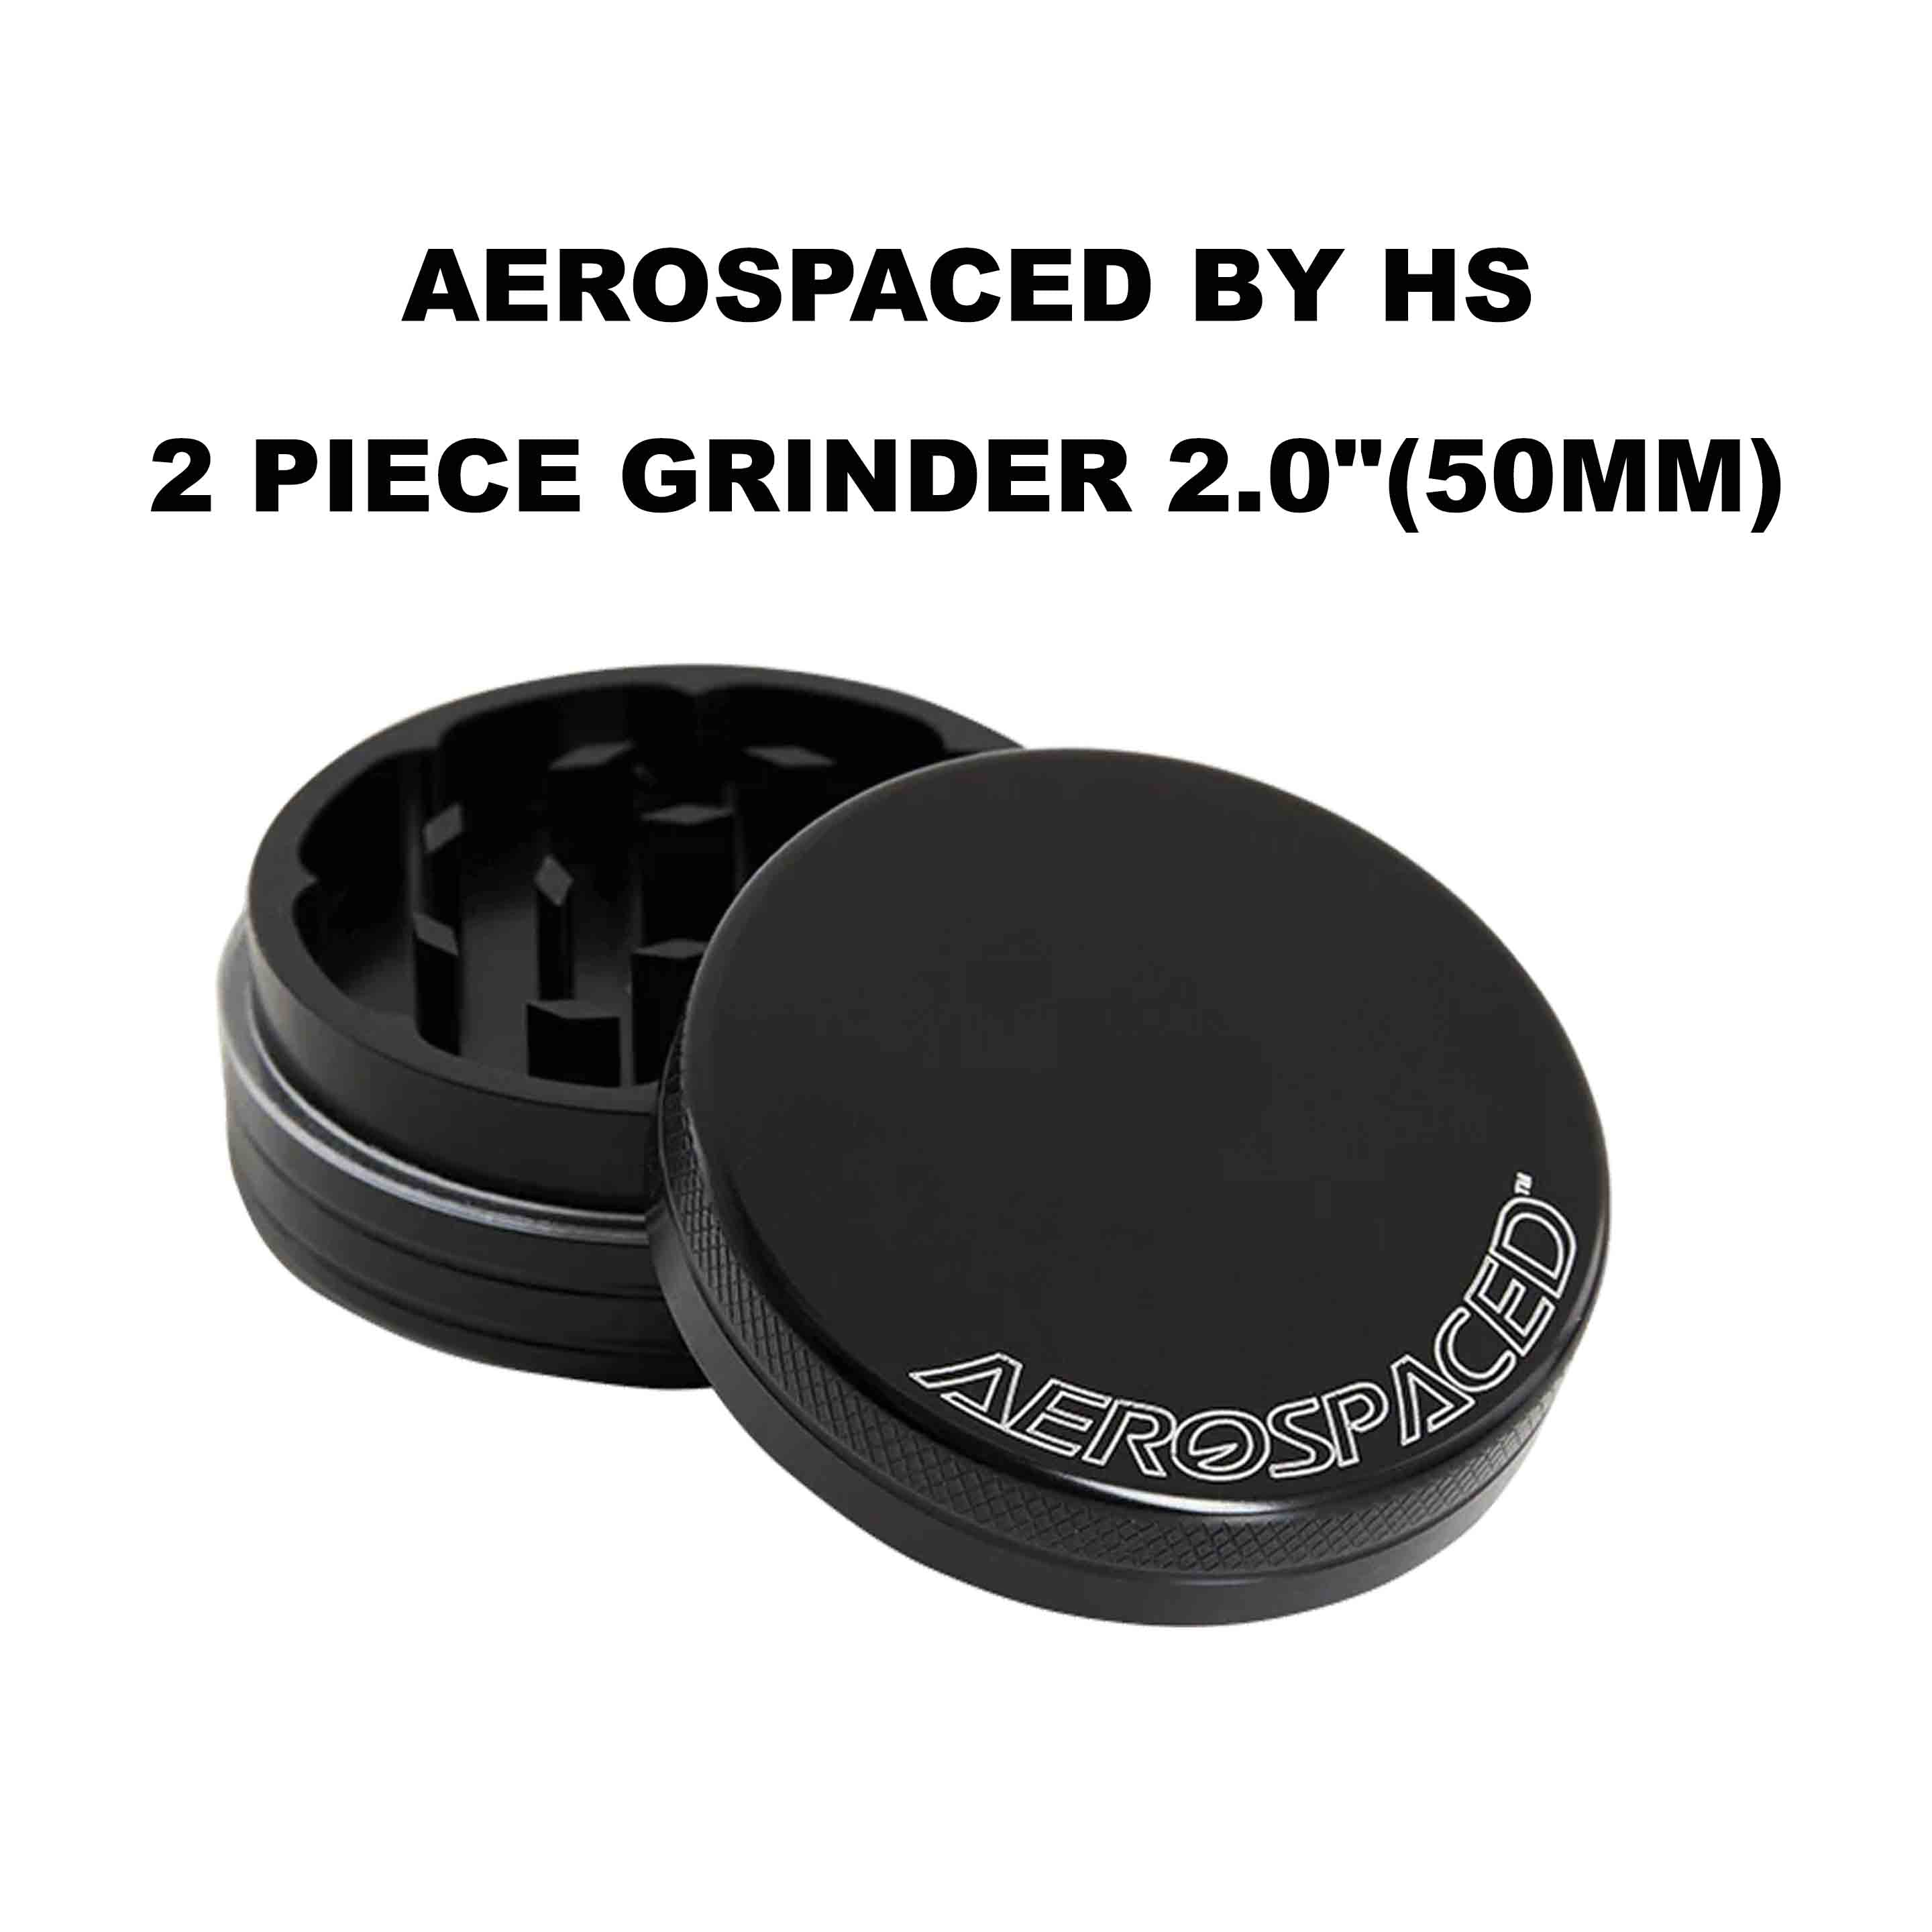 Aerospaced by HS 2 piece grinder 2.0" (50mm) - HYPE WHOLESALE